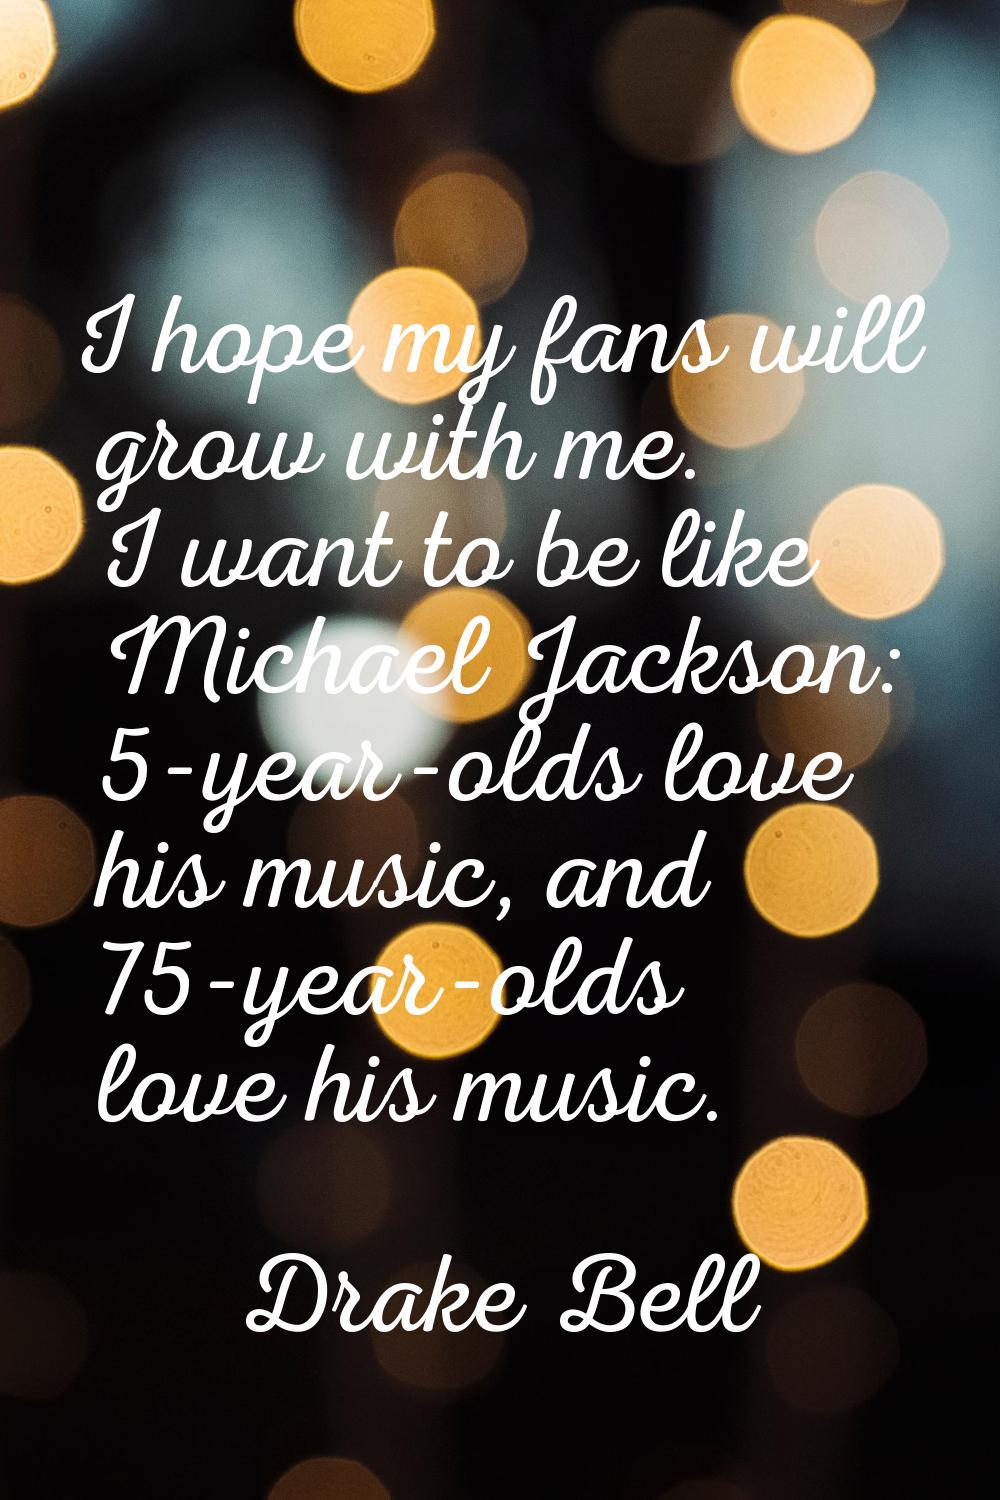 I hope my fans will grow with me. I want to be like Michael Jackson: 5-year-olds love his music, an